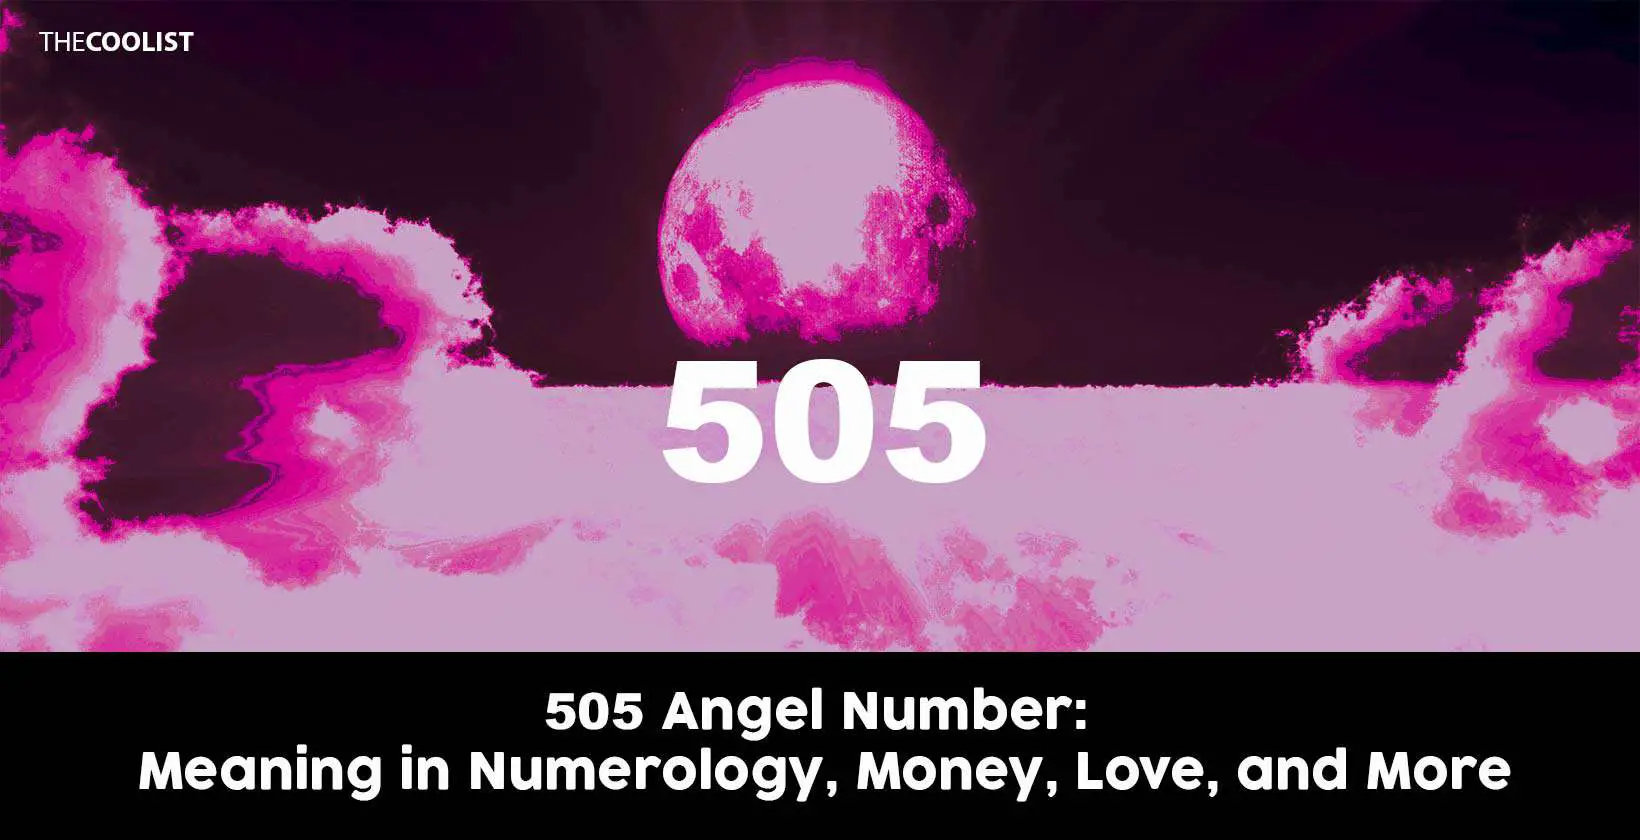 What Is The Spiritual Meaning Of The Number 505?